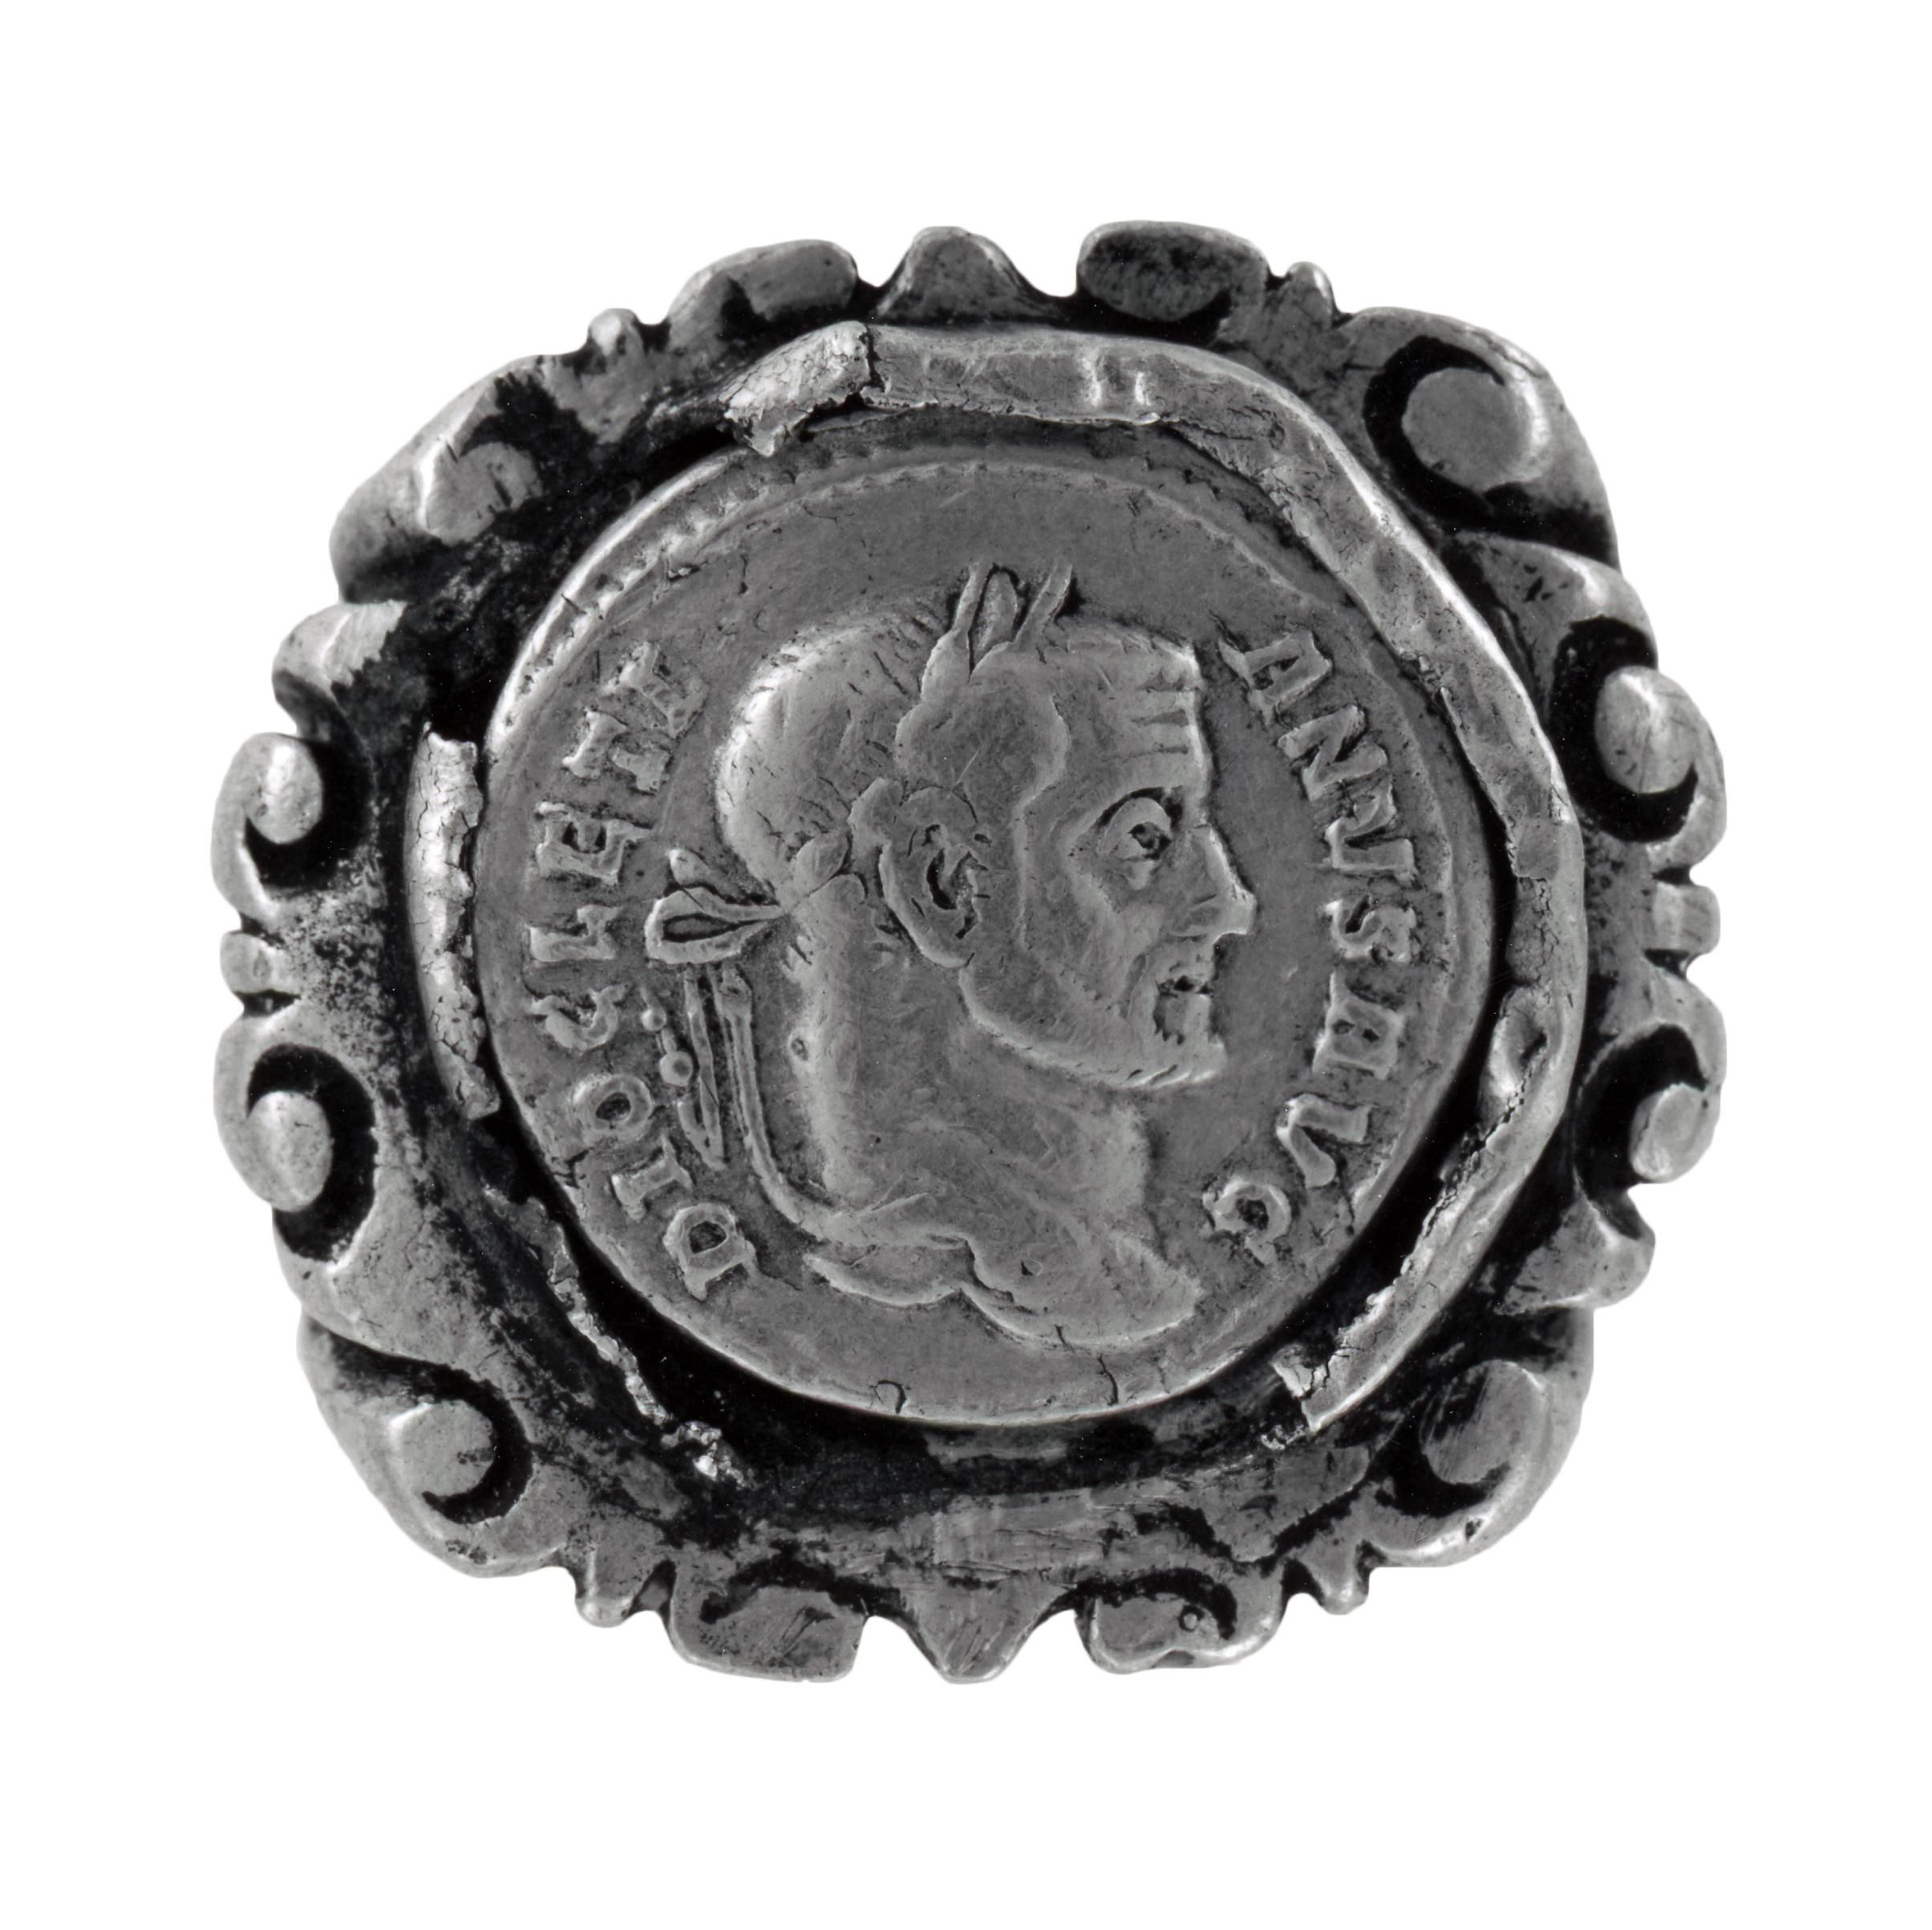 Ring with the image of Emperor Diocletian (r. 284-305). The reverse shows four soldiers sacrificing in front of a camp. Thought to have been worn by a soldier to show allegiance to the emperor.British Museum. 